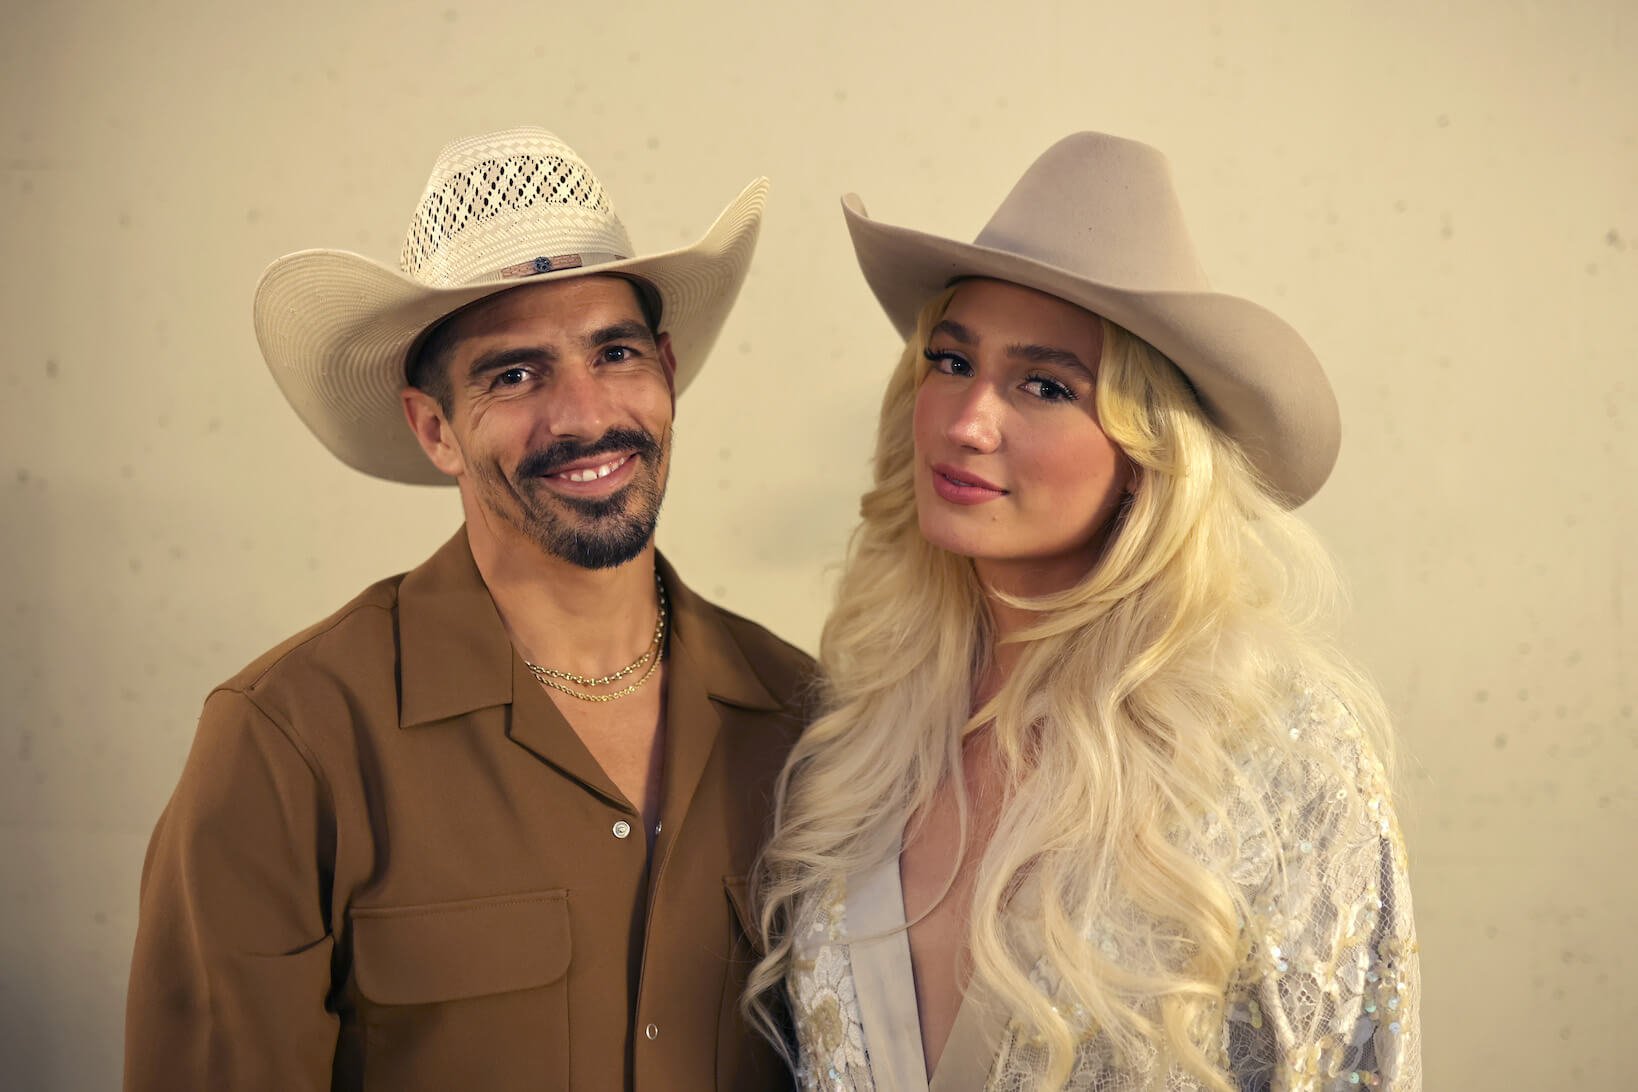 'The Challenge' star Jordan Wiseley next to his girlfriend, Diner. They're both wearing cowboy hats.